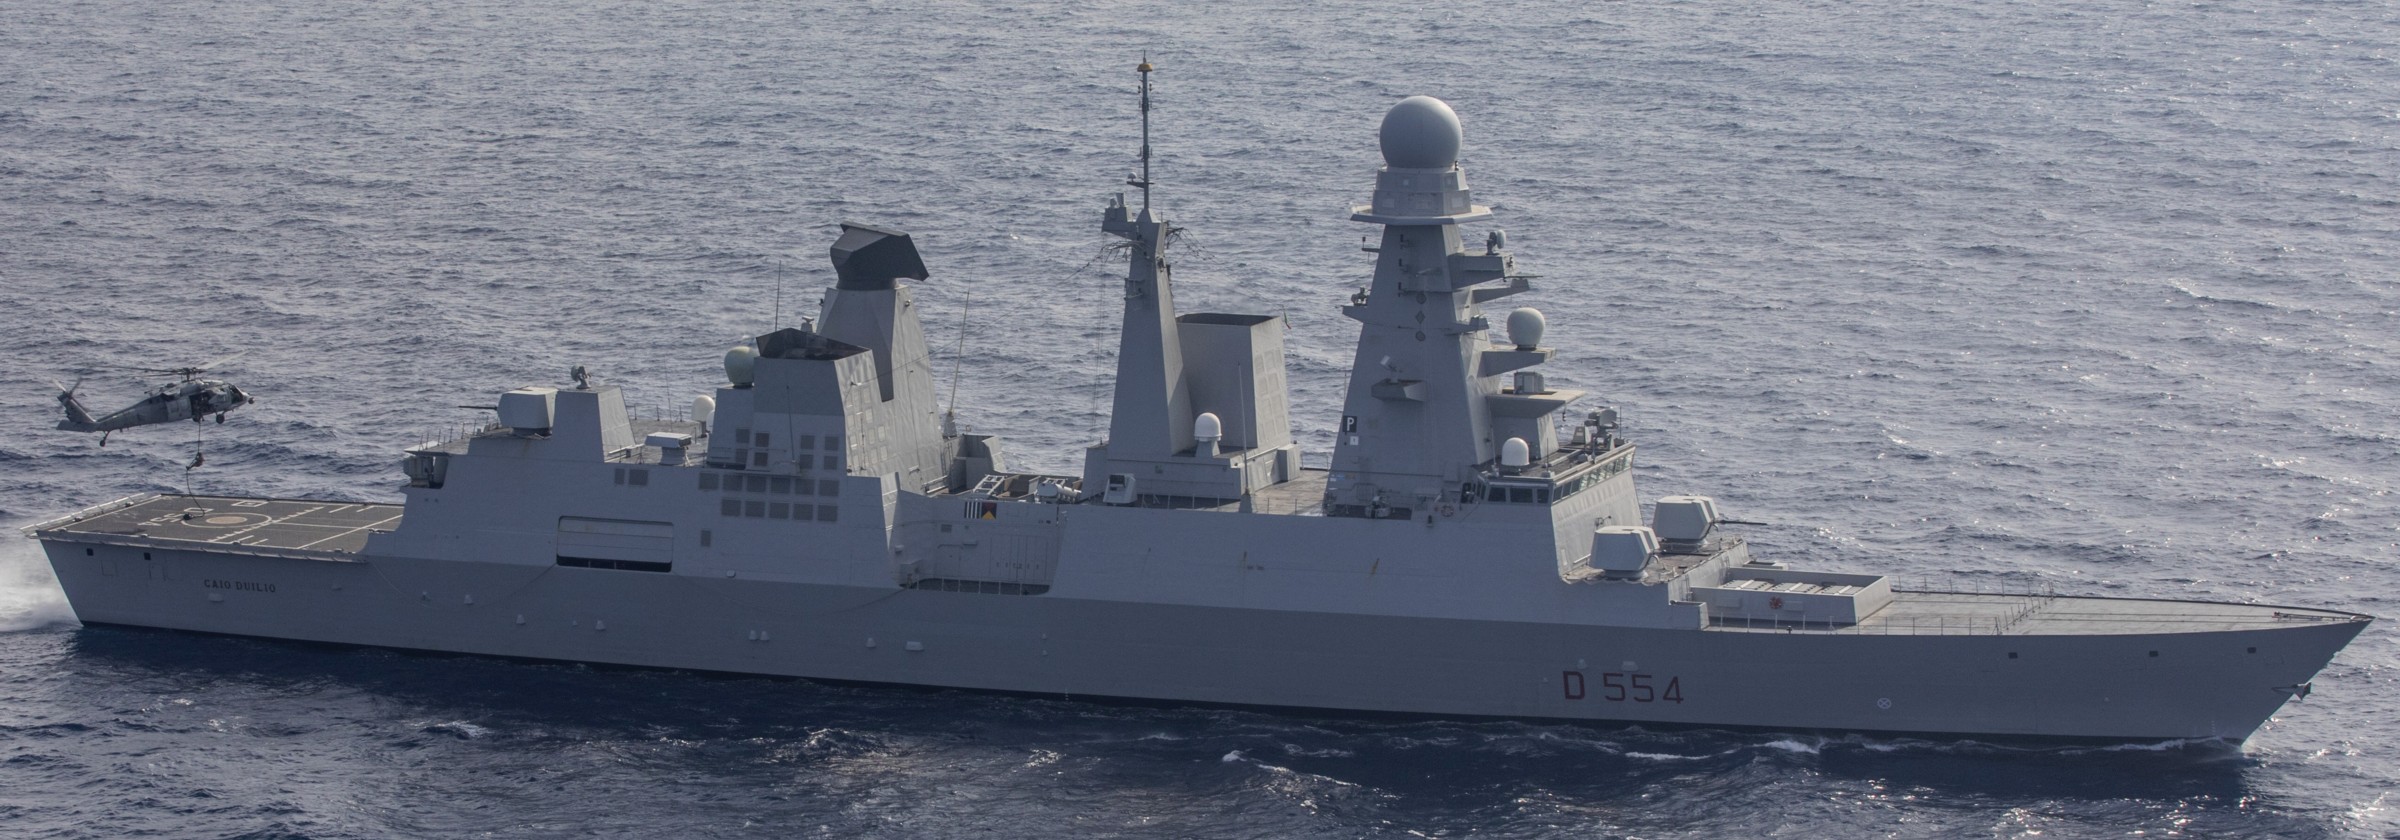 d-554 caio duilio its nave horizon class guided missile destroyer ddgh italian navy marina militare 45